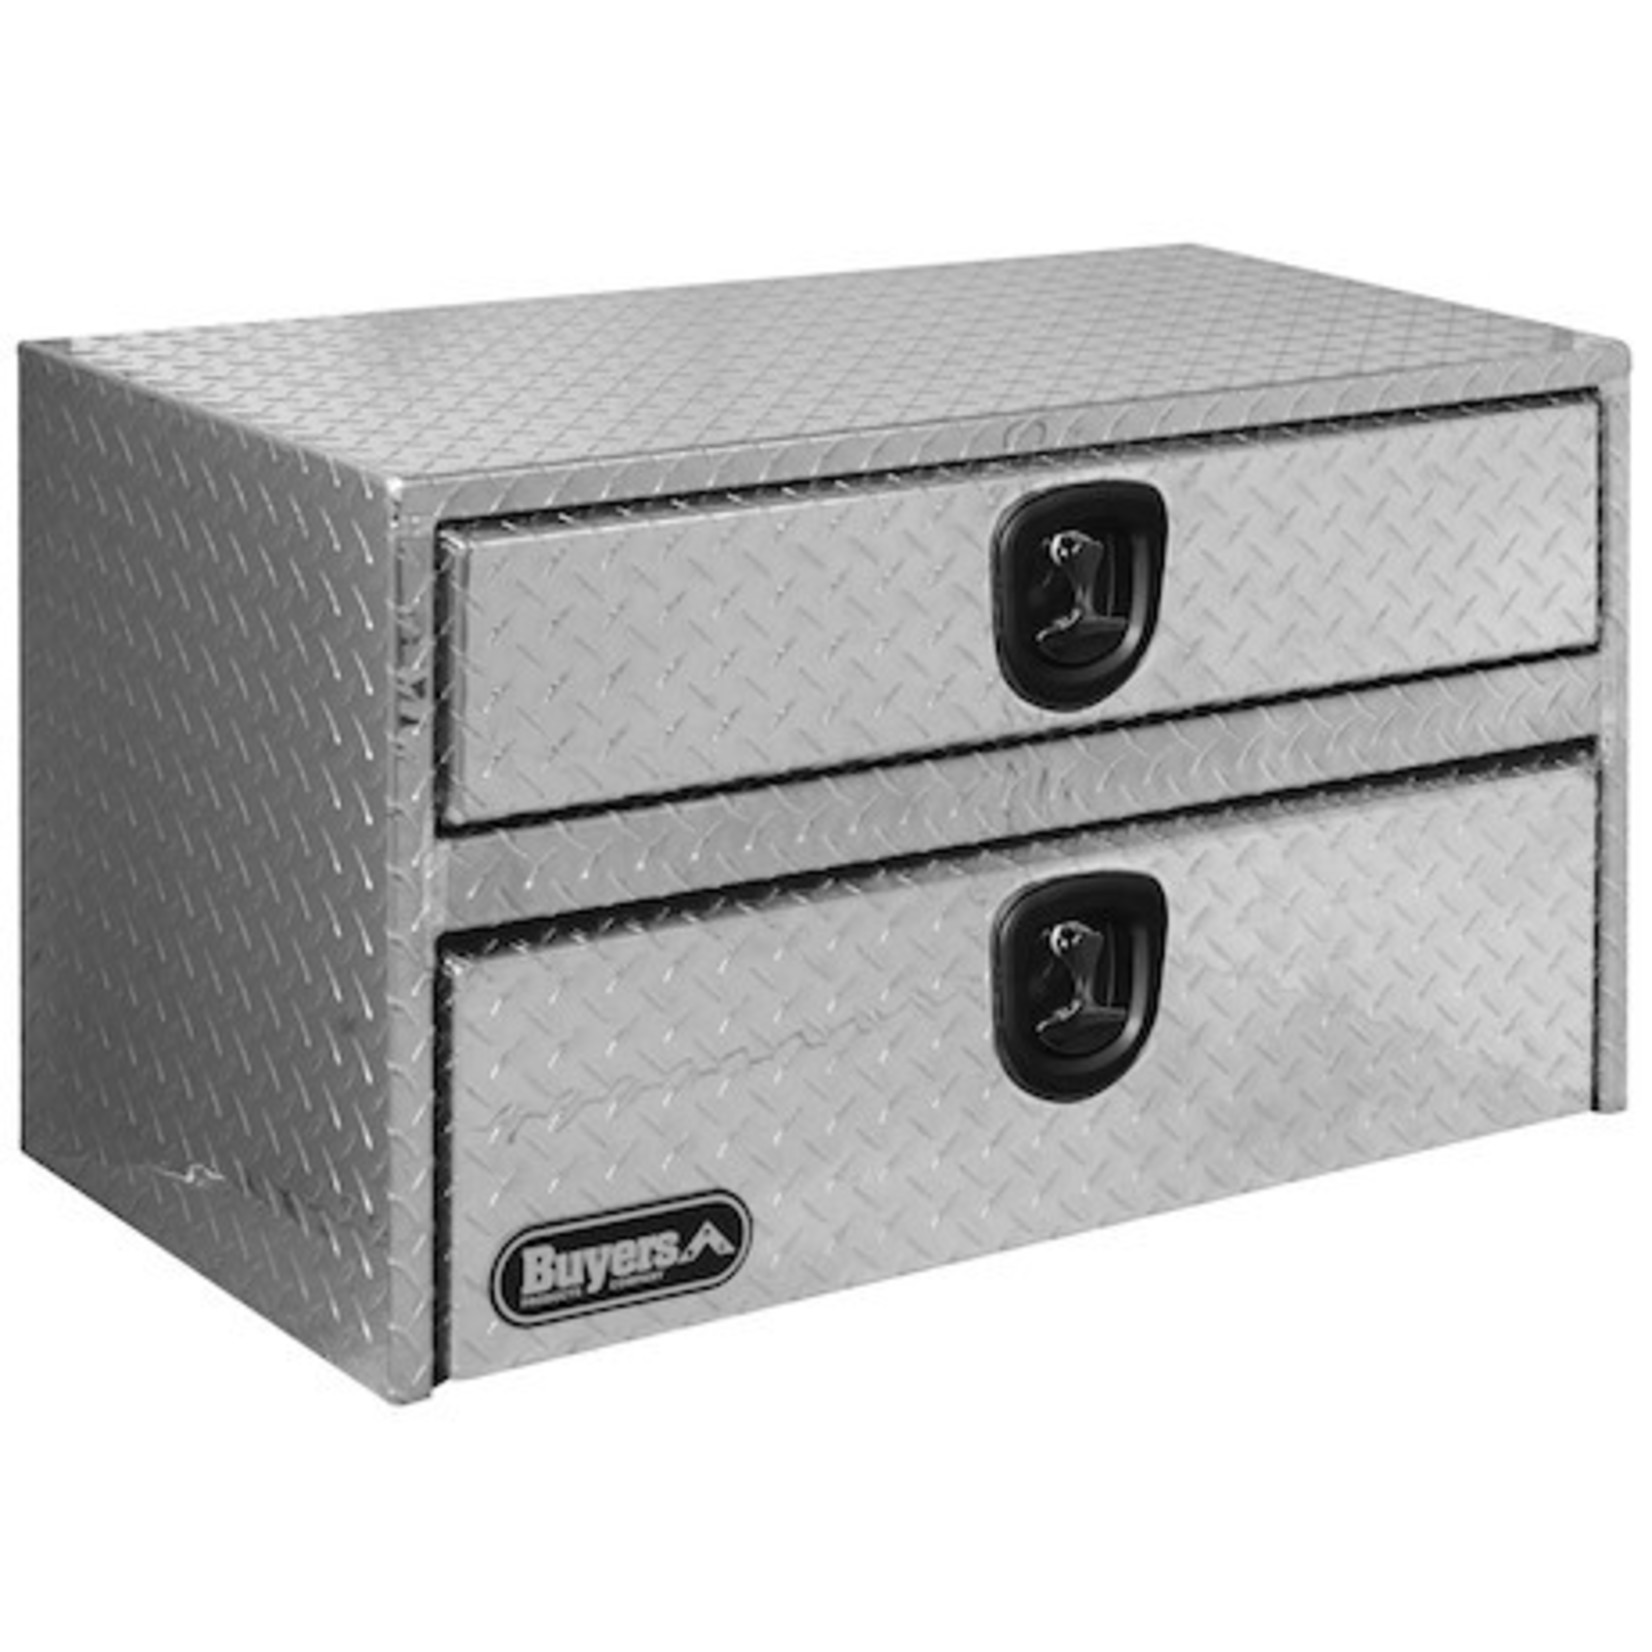 Buyers Products Company Diamond Tread Aluminum Underbody Truck Box with Drawer Series